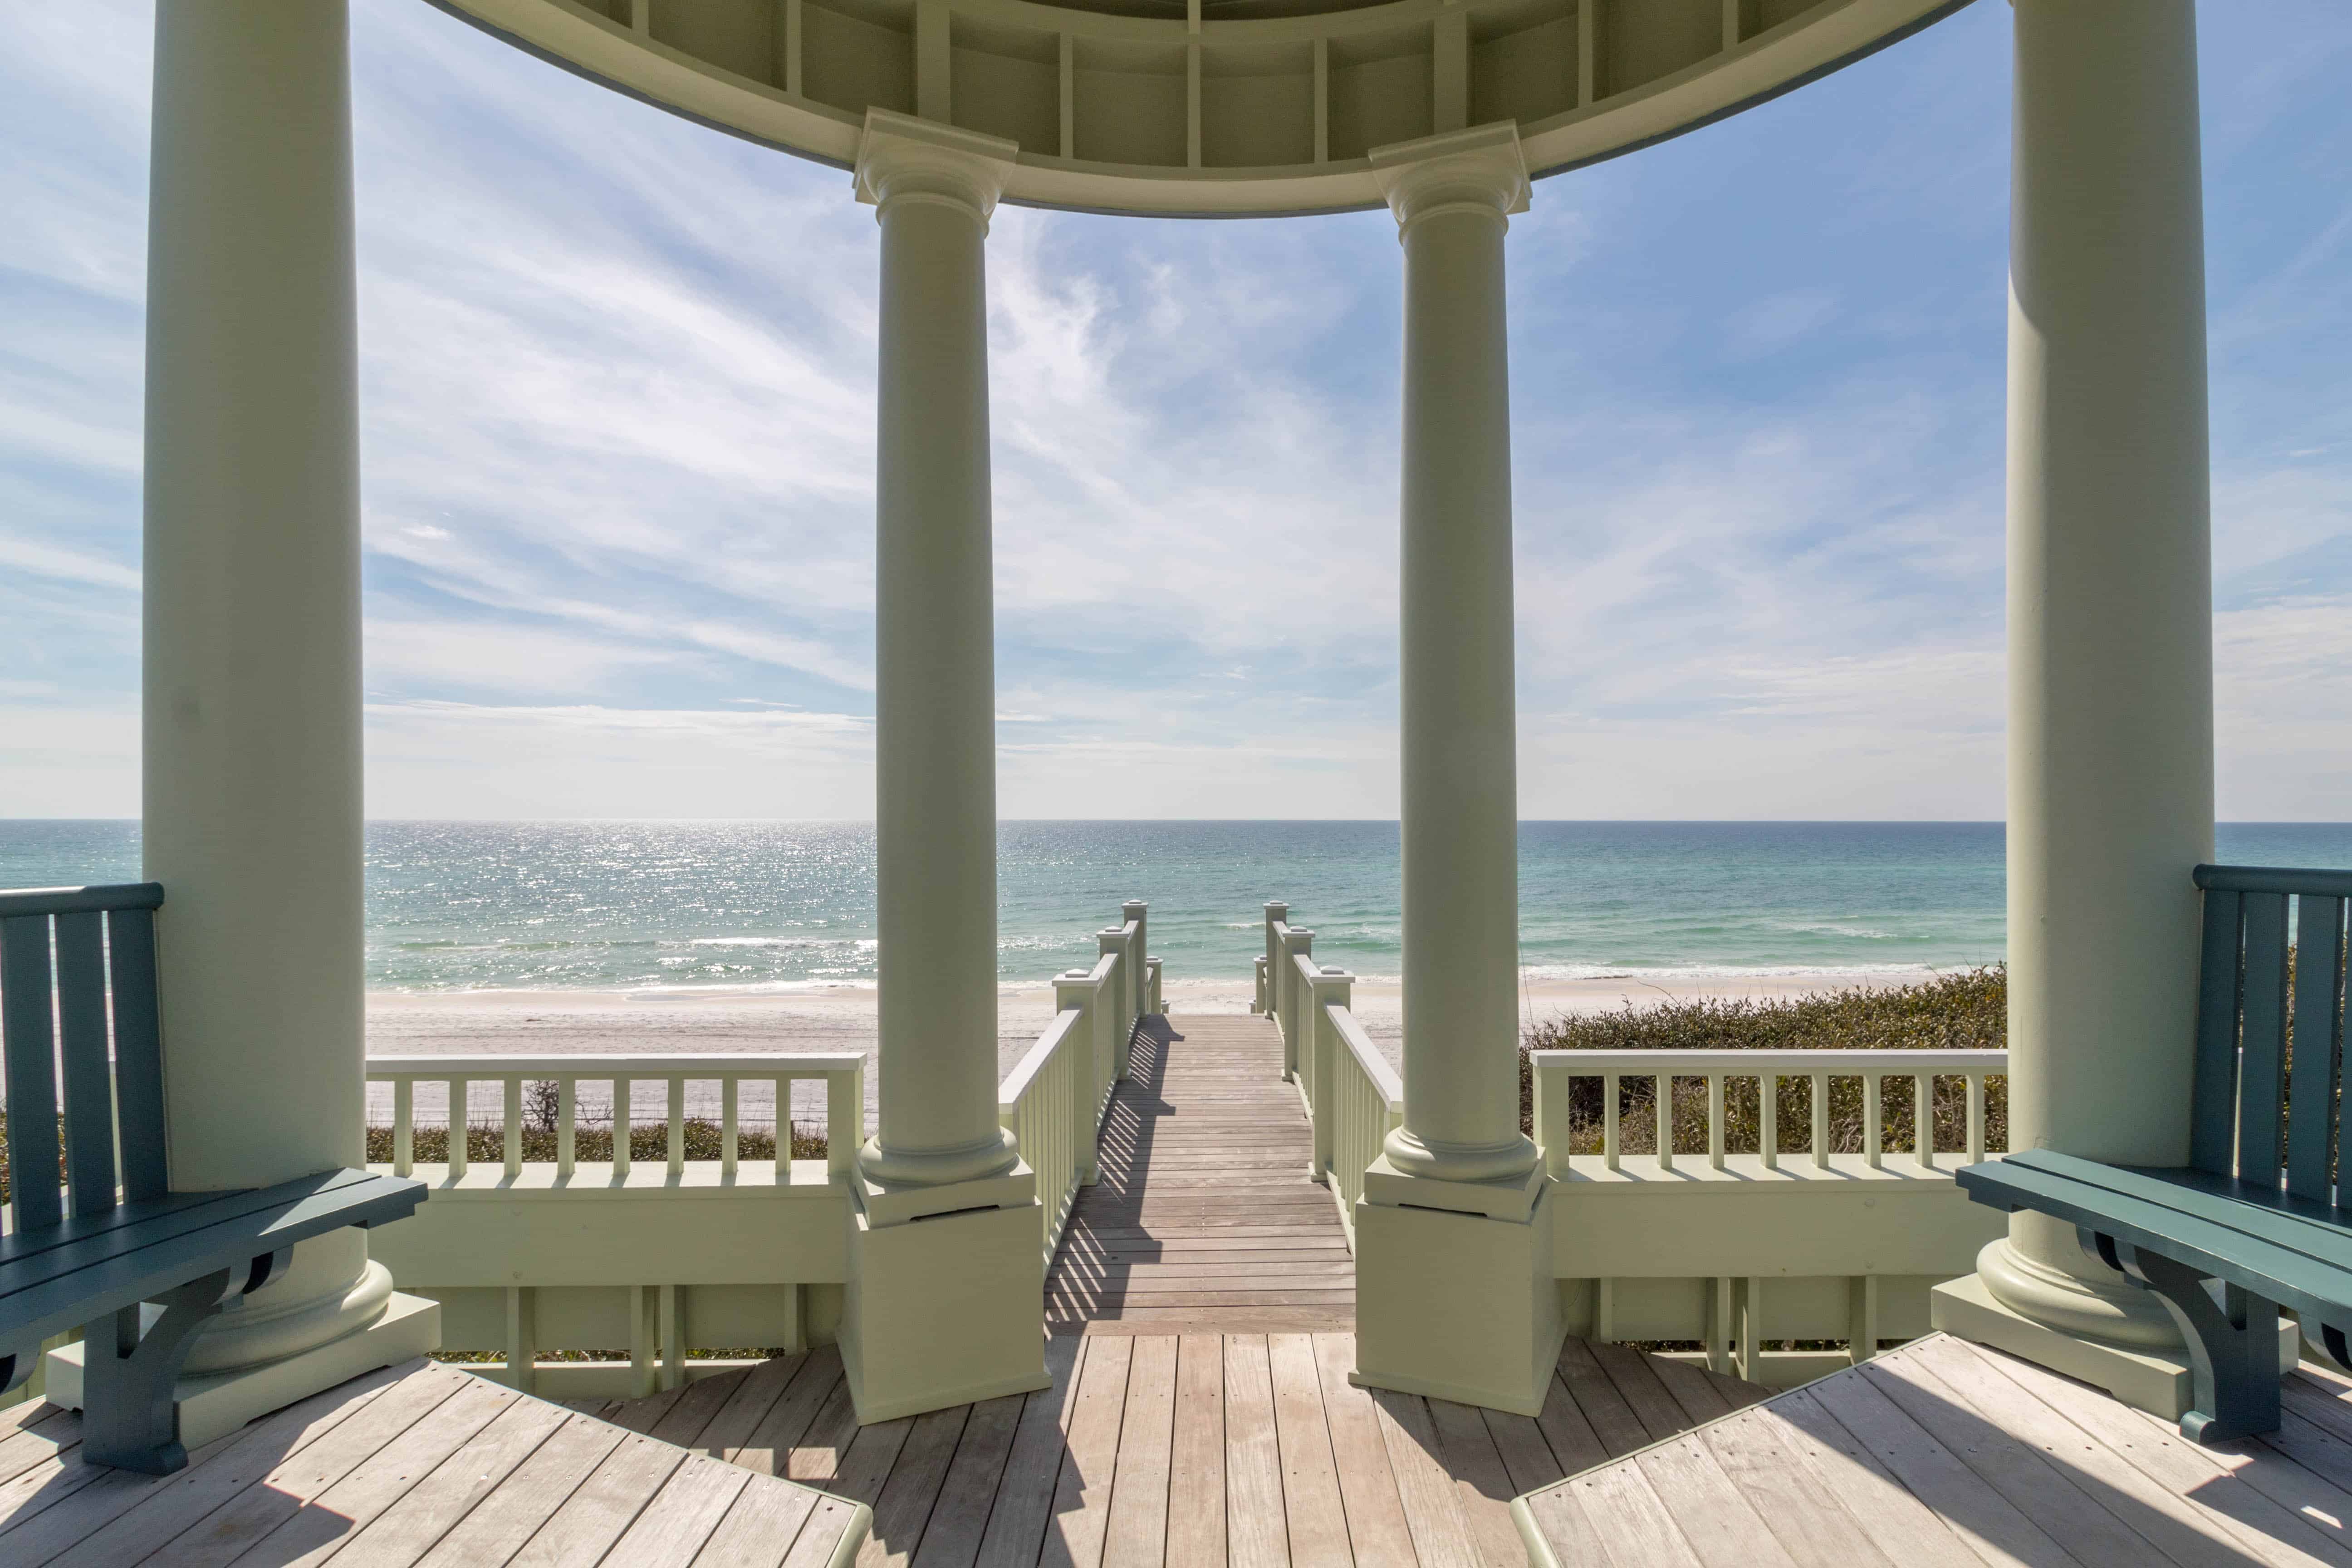 Owner’s Guide to Vacation Rental Cleaning on 30A